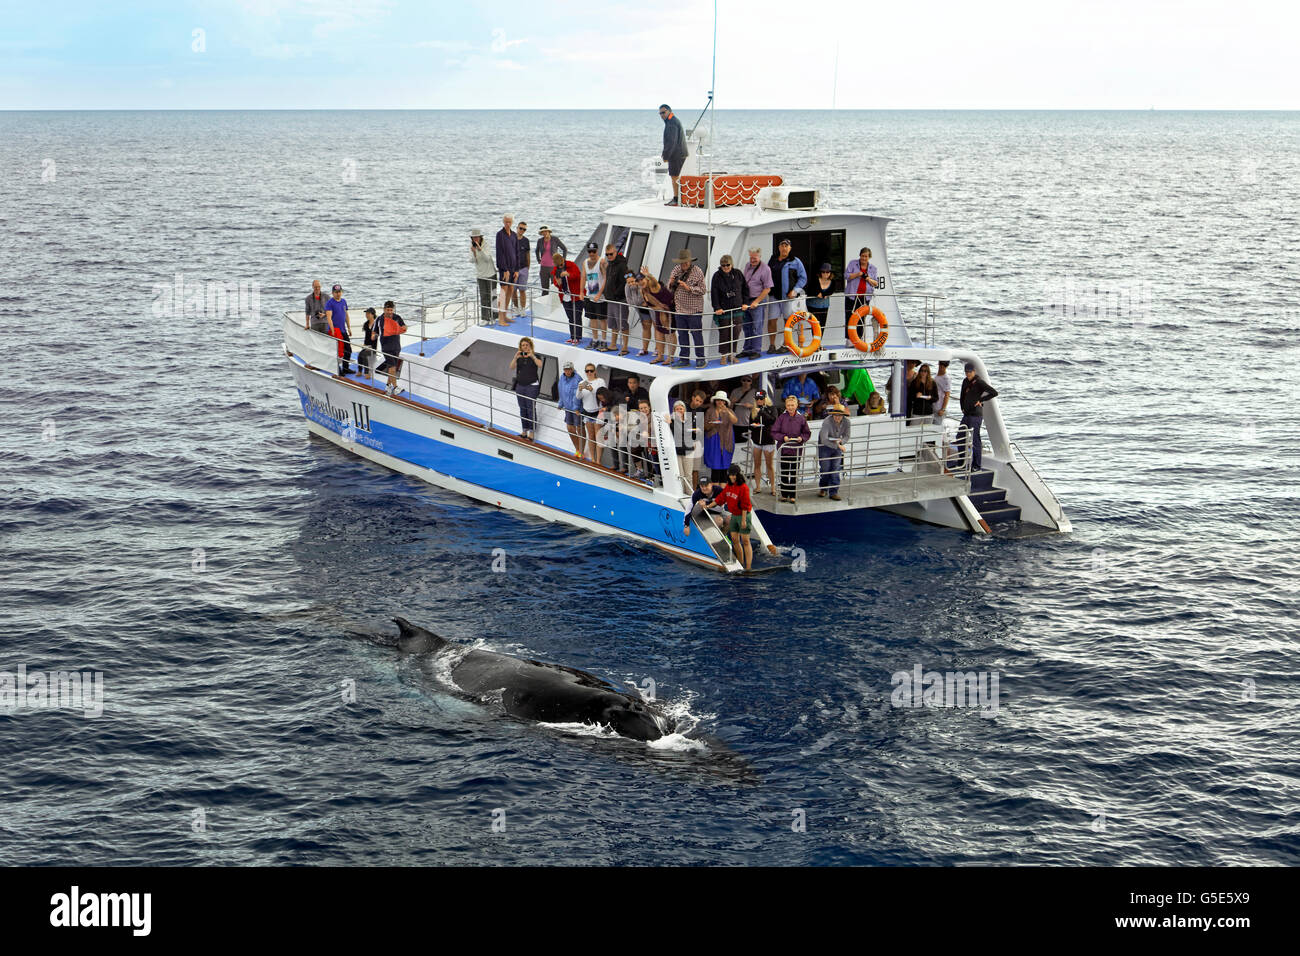 Group of tourists on a whale-watching boat, watching humpback whale (Megaptera novaeangliae), Mooloolaba Queensland, Pacific Stock Photo